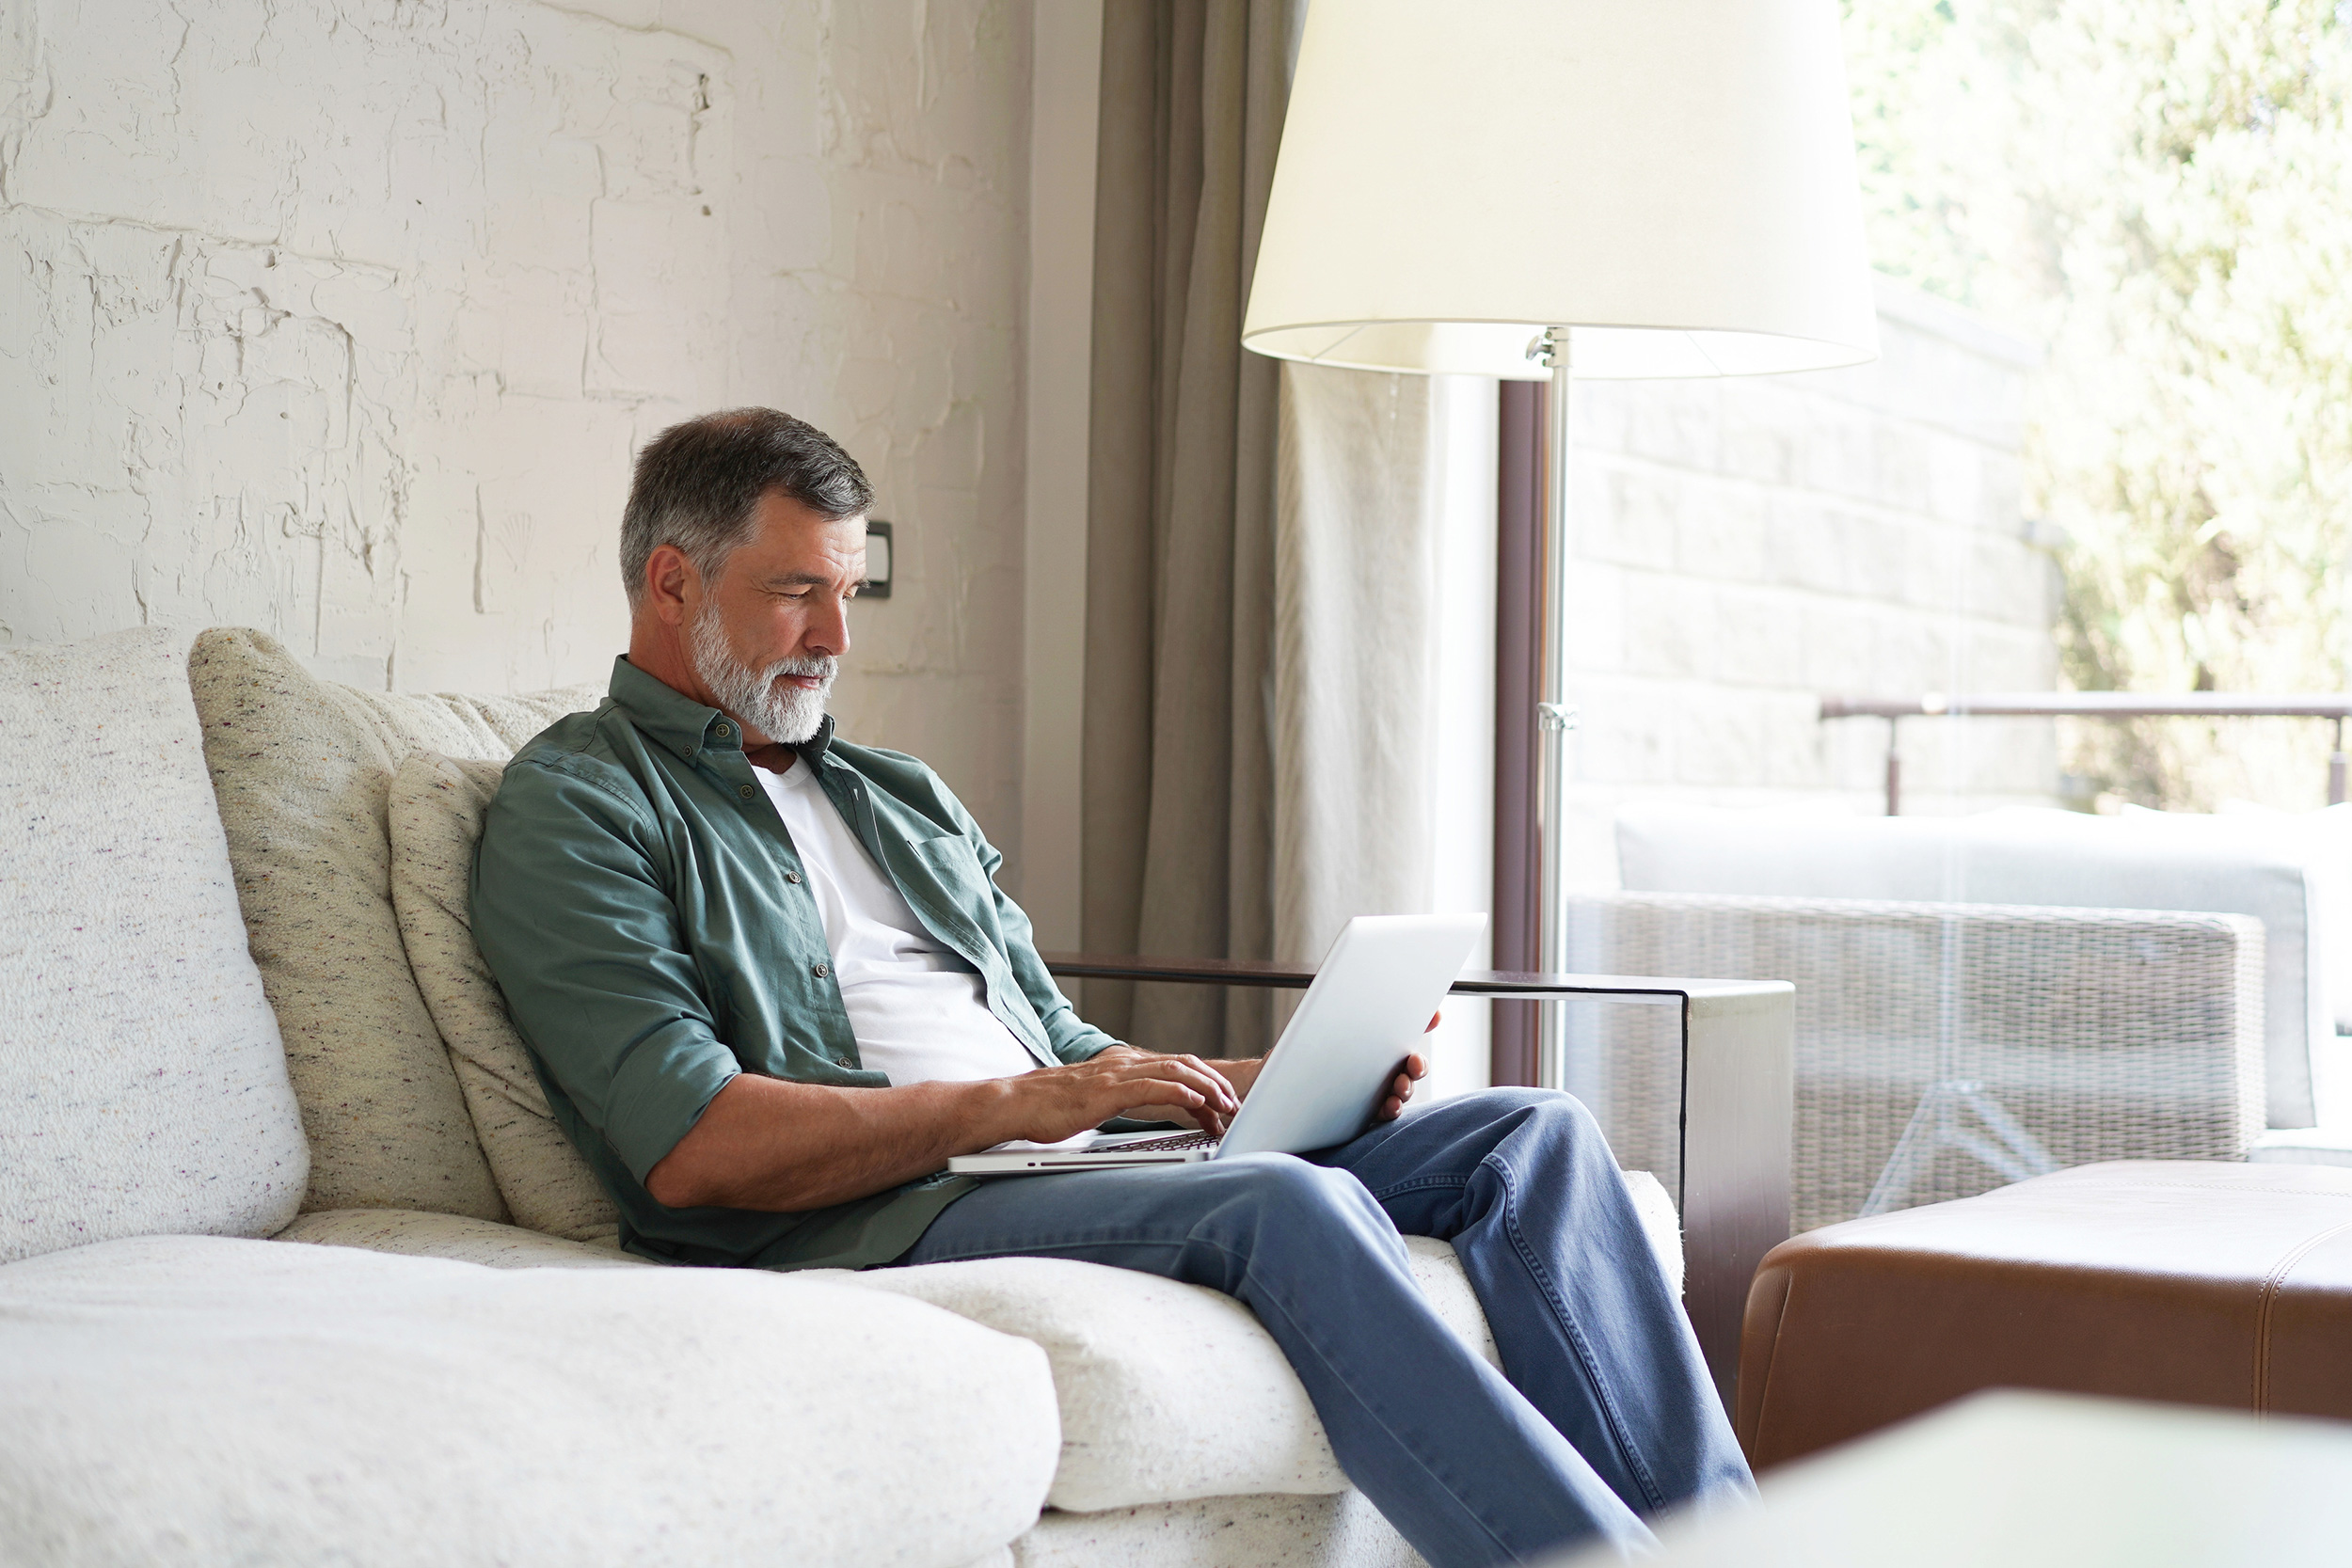 Reclining on his couch, a man types on his laptop. Troutman & Troutman disability lawyers answer questions about disability benefits every day.